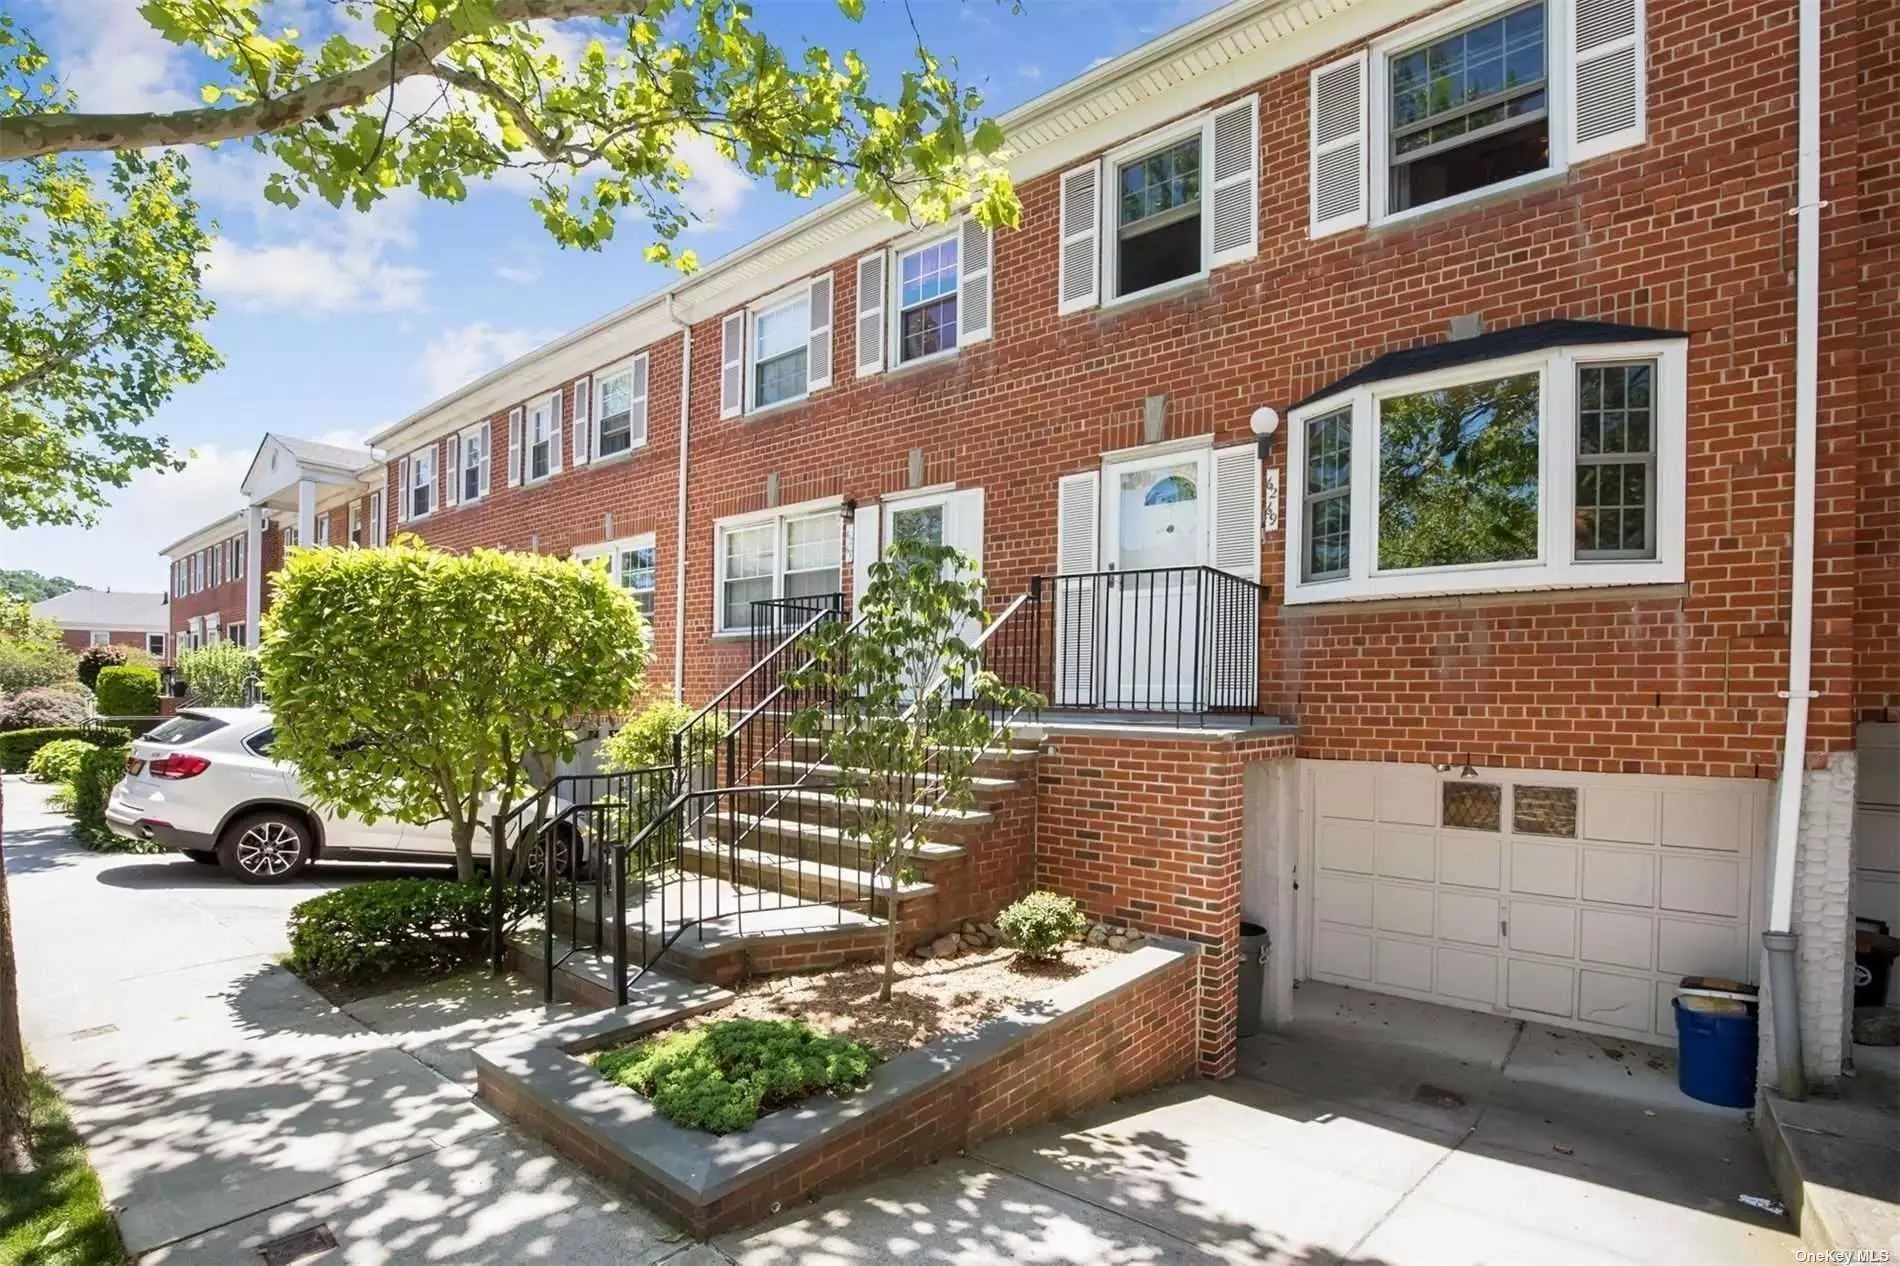 Beautiful 3 bedroom with updated bathrooms, all new Anderson windows and doors. Large bay window in living room. Bedrooms freshly painted and hardwood floors recently refinished. Unit overlooks pool. Close to shopping and public transportation.